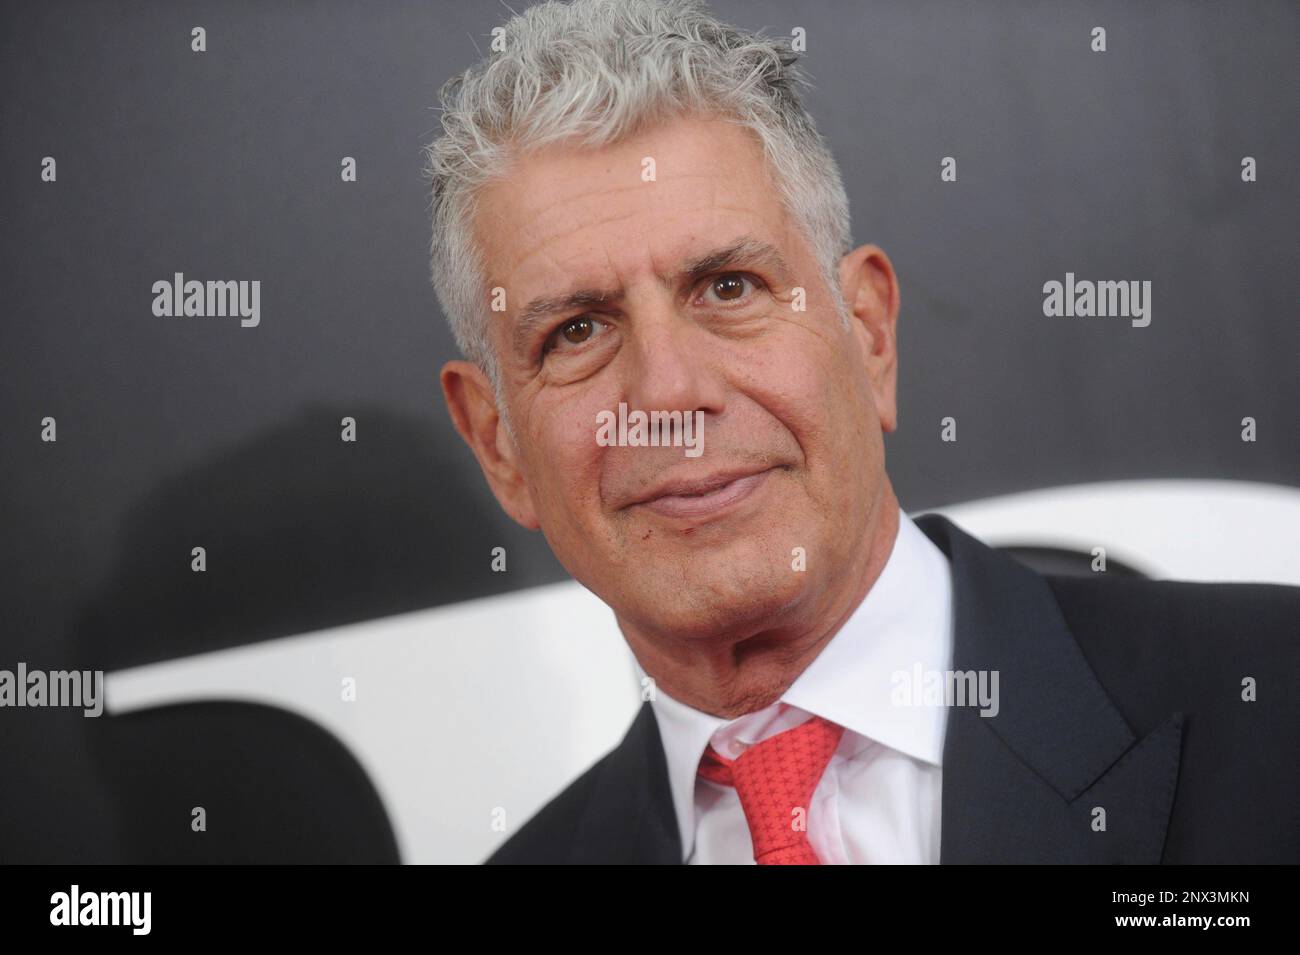 Photo by: Dennis Van Tine/STAR MAX/IPx 2018 11/23/15 Anthony Bourdain at the  premiere of "The Big Short". (NYC Stock Photo - Alamy